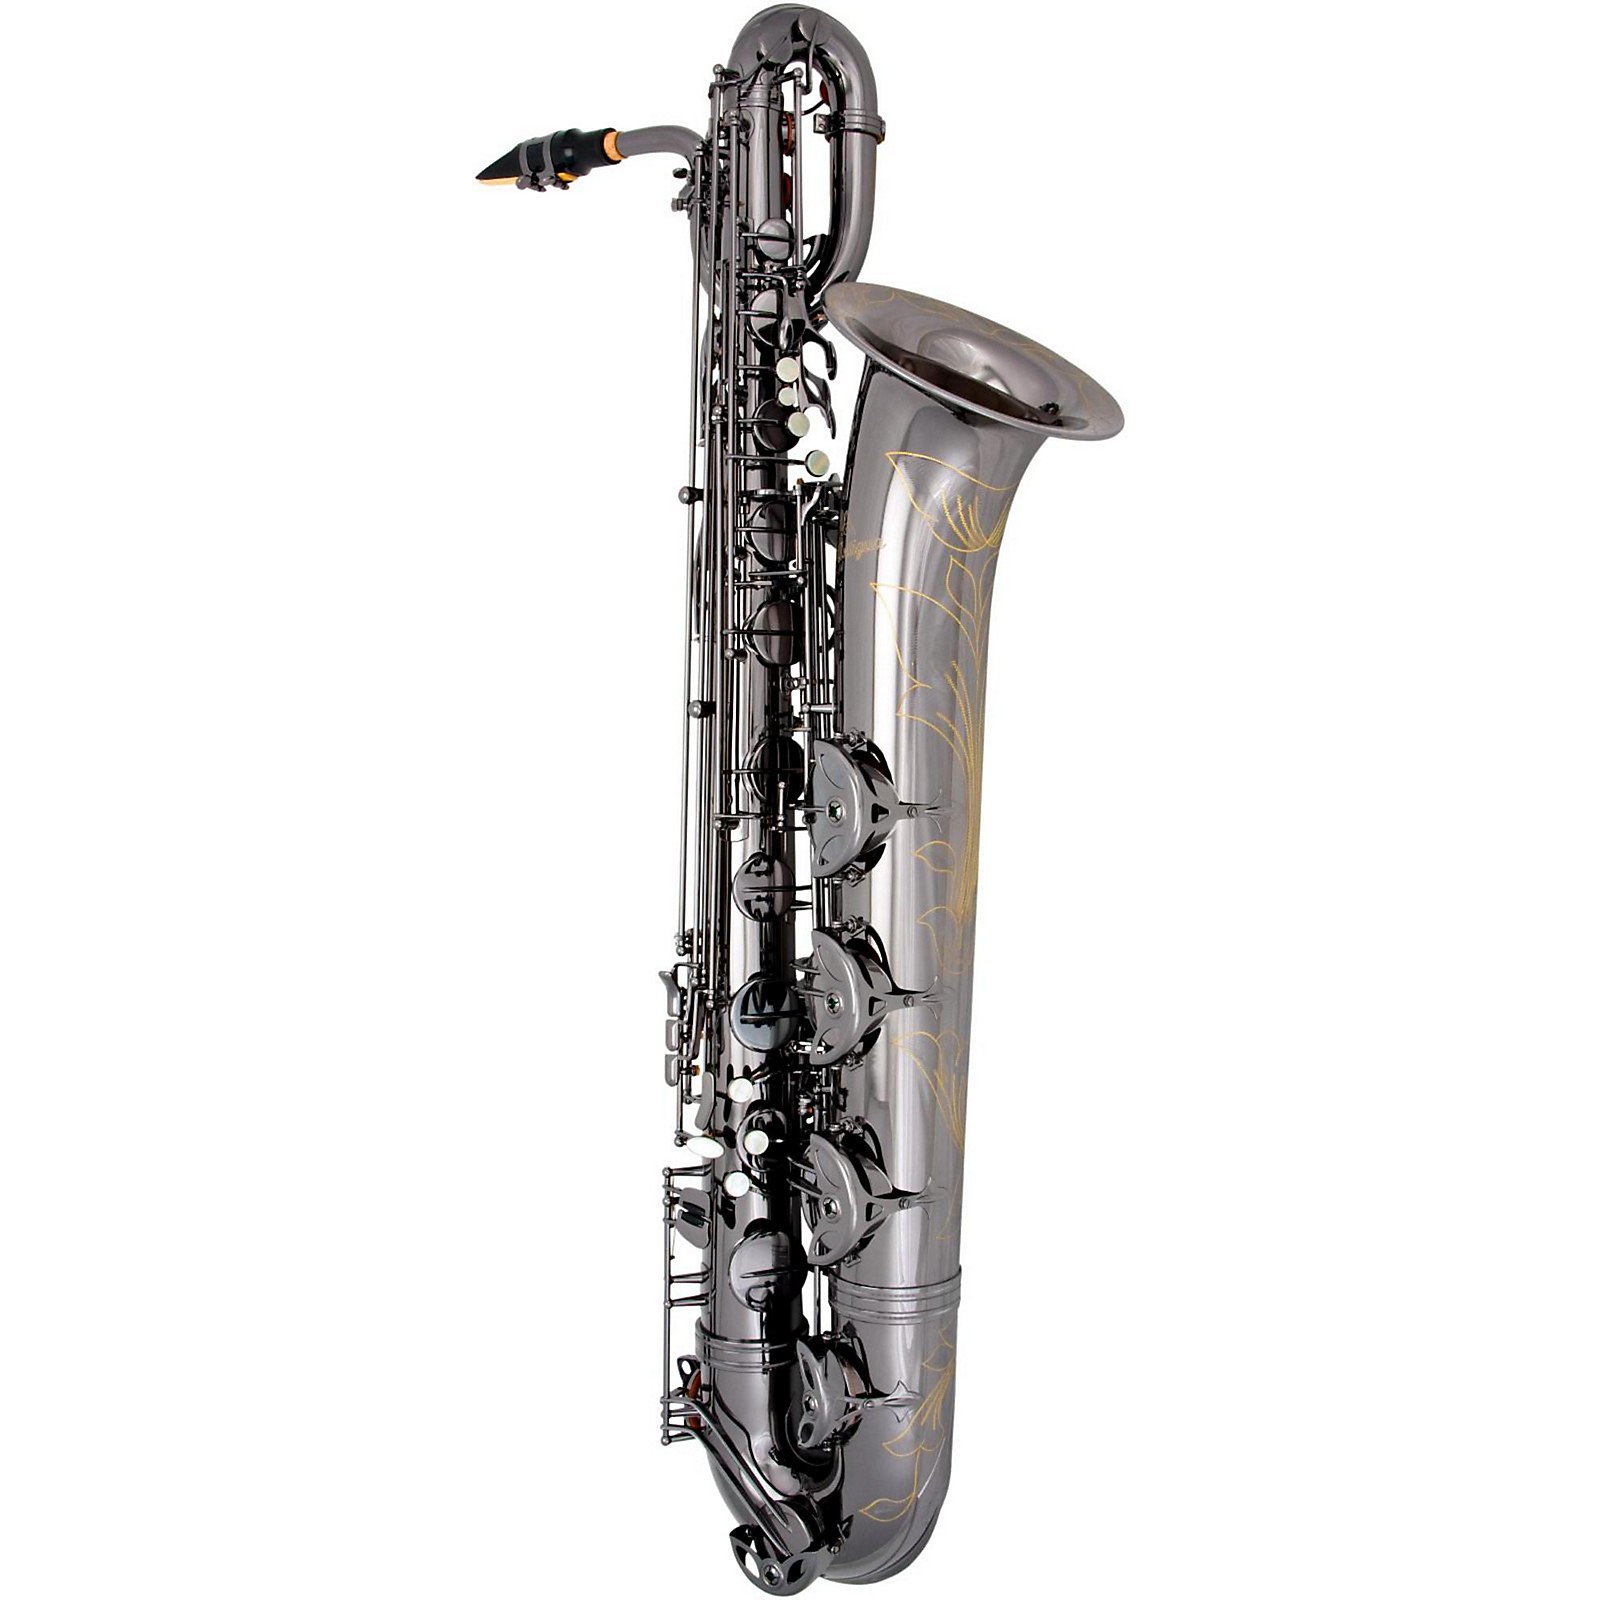 antigua winds sax review